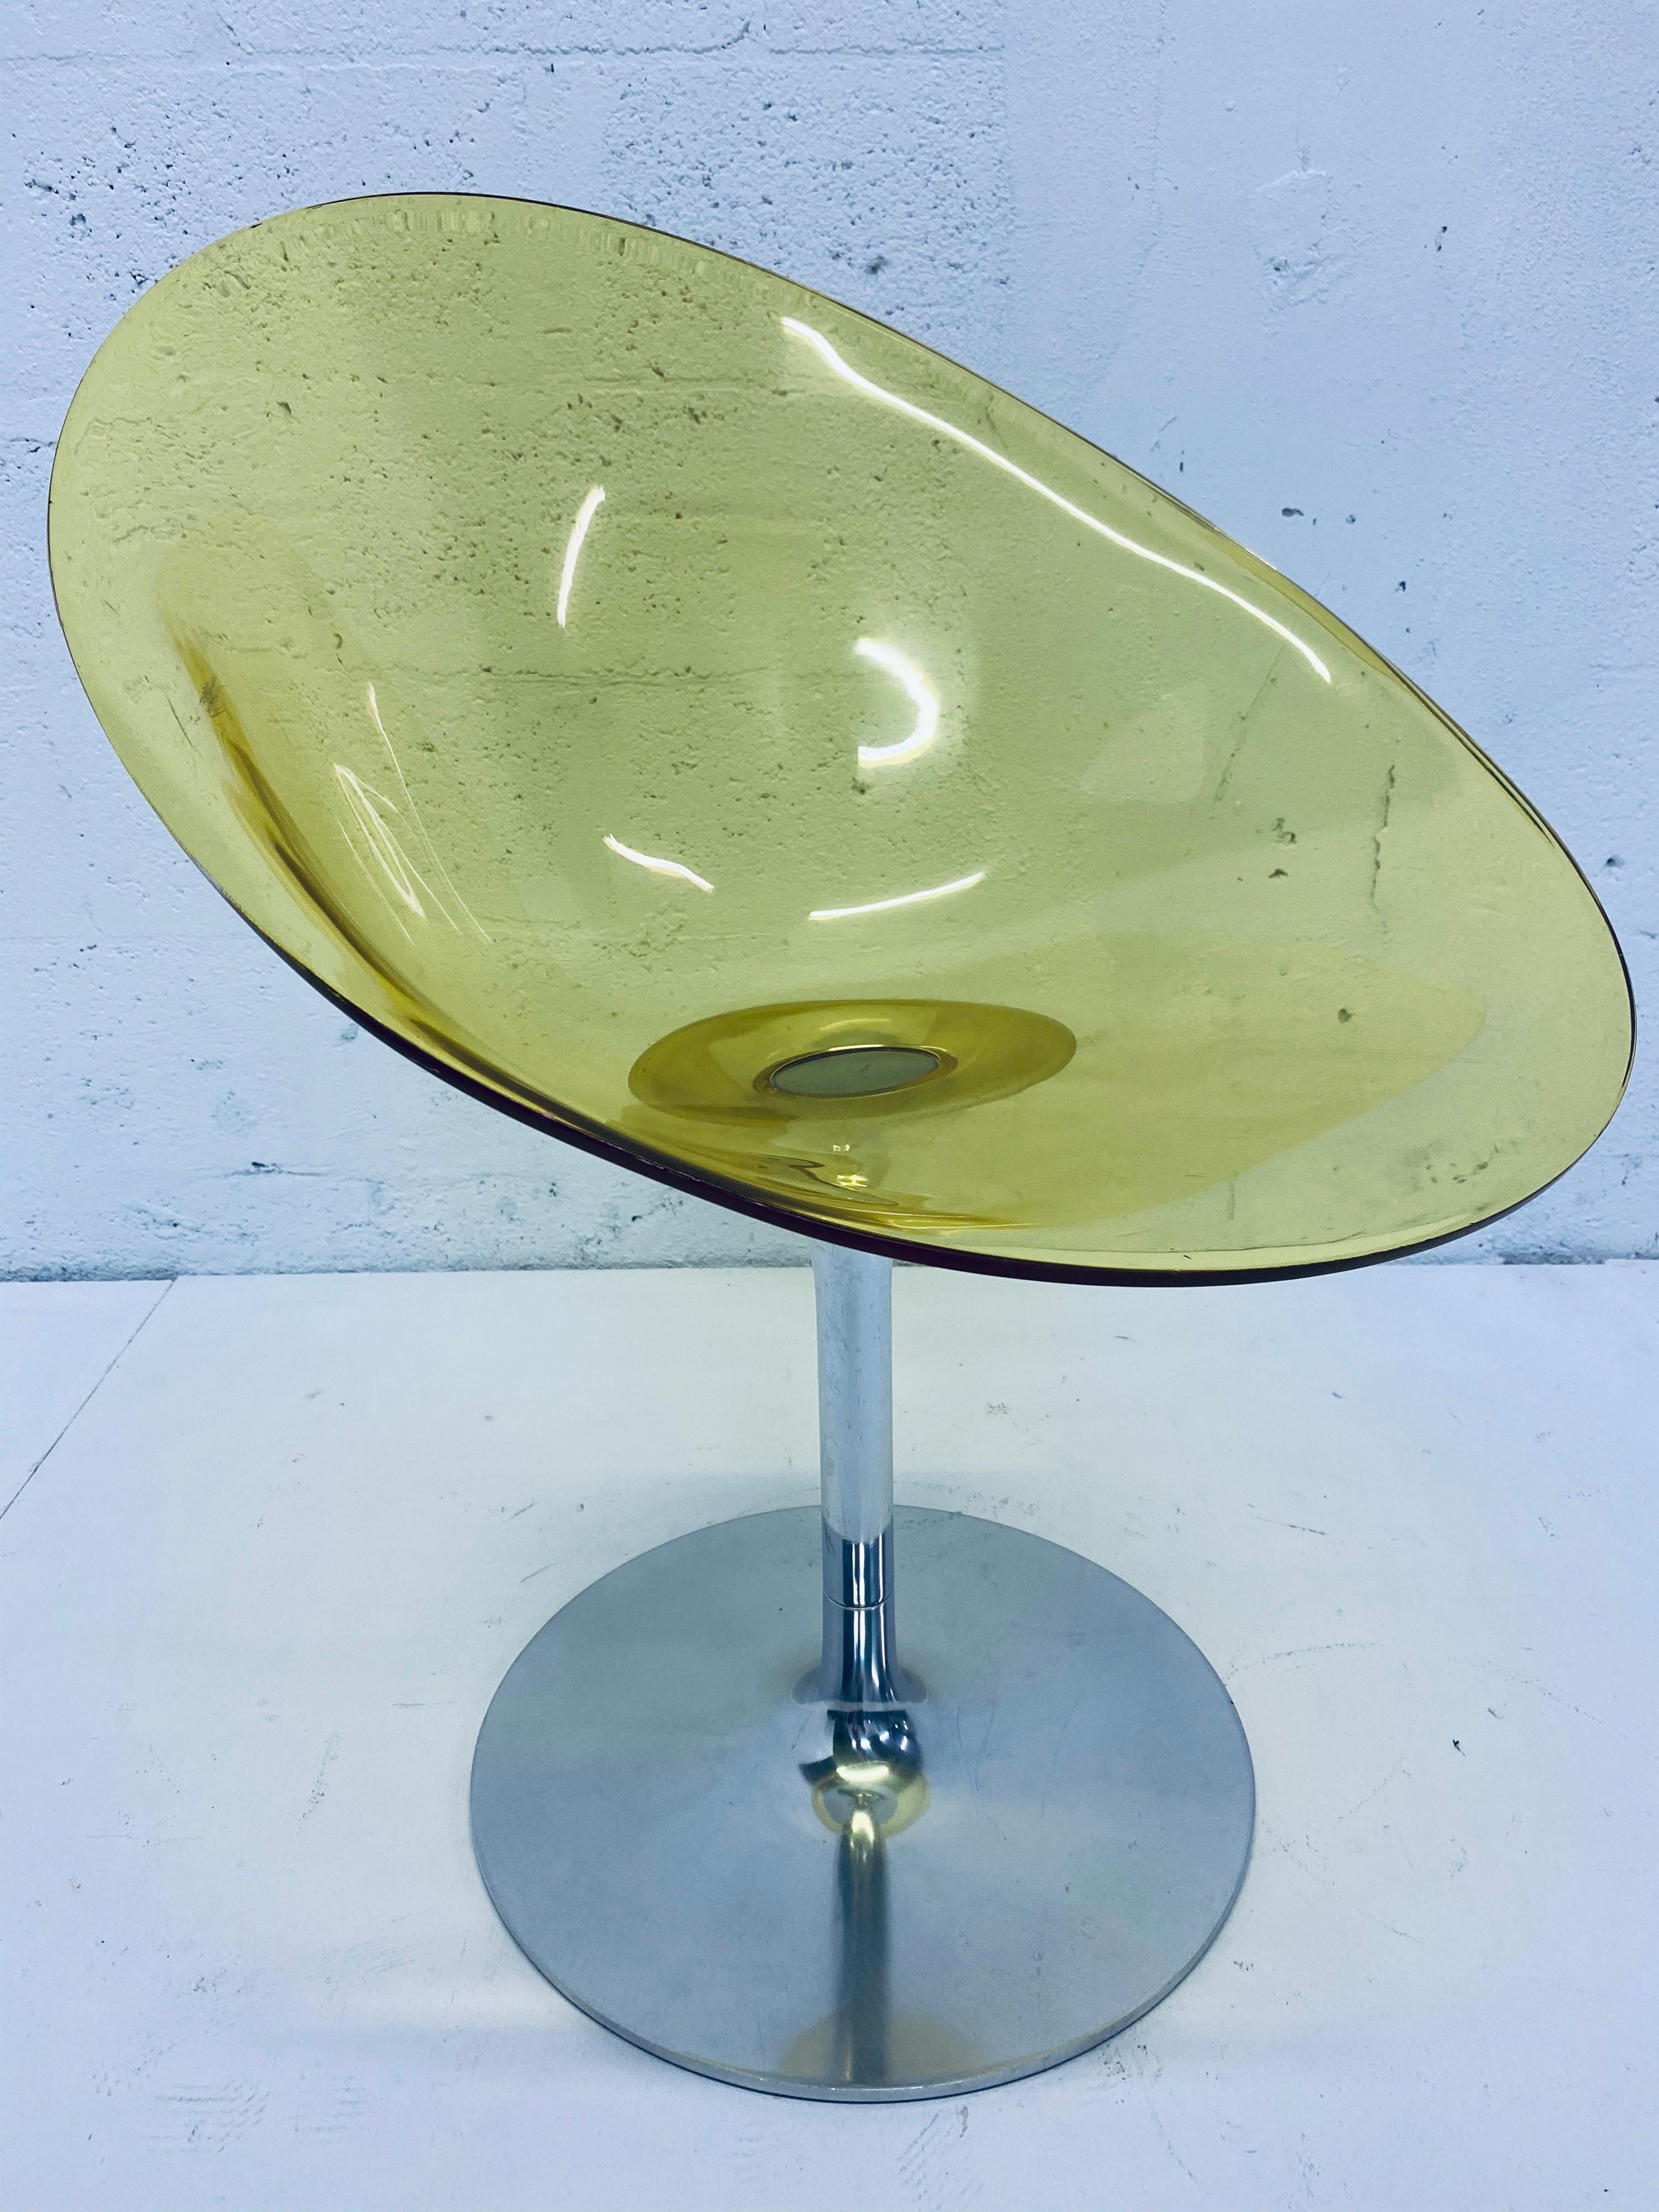 Yellow Eros chair with aluminum swivel base by Philippe Starck for Kartell. Made in Italy.